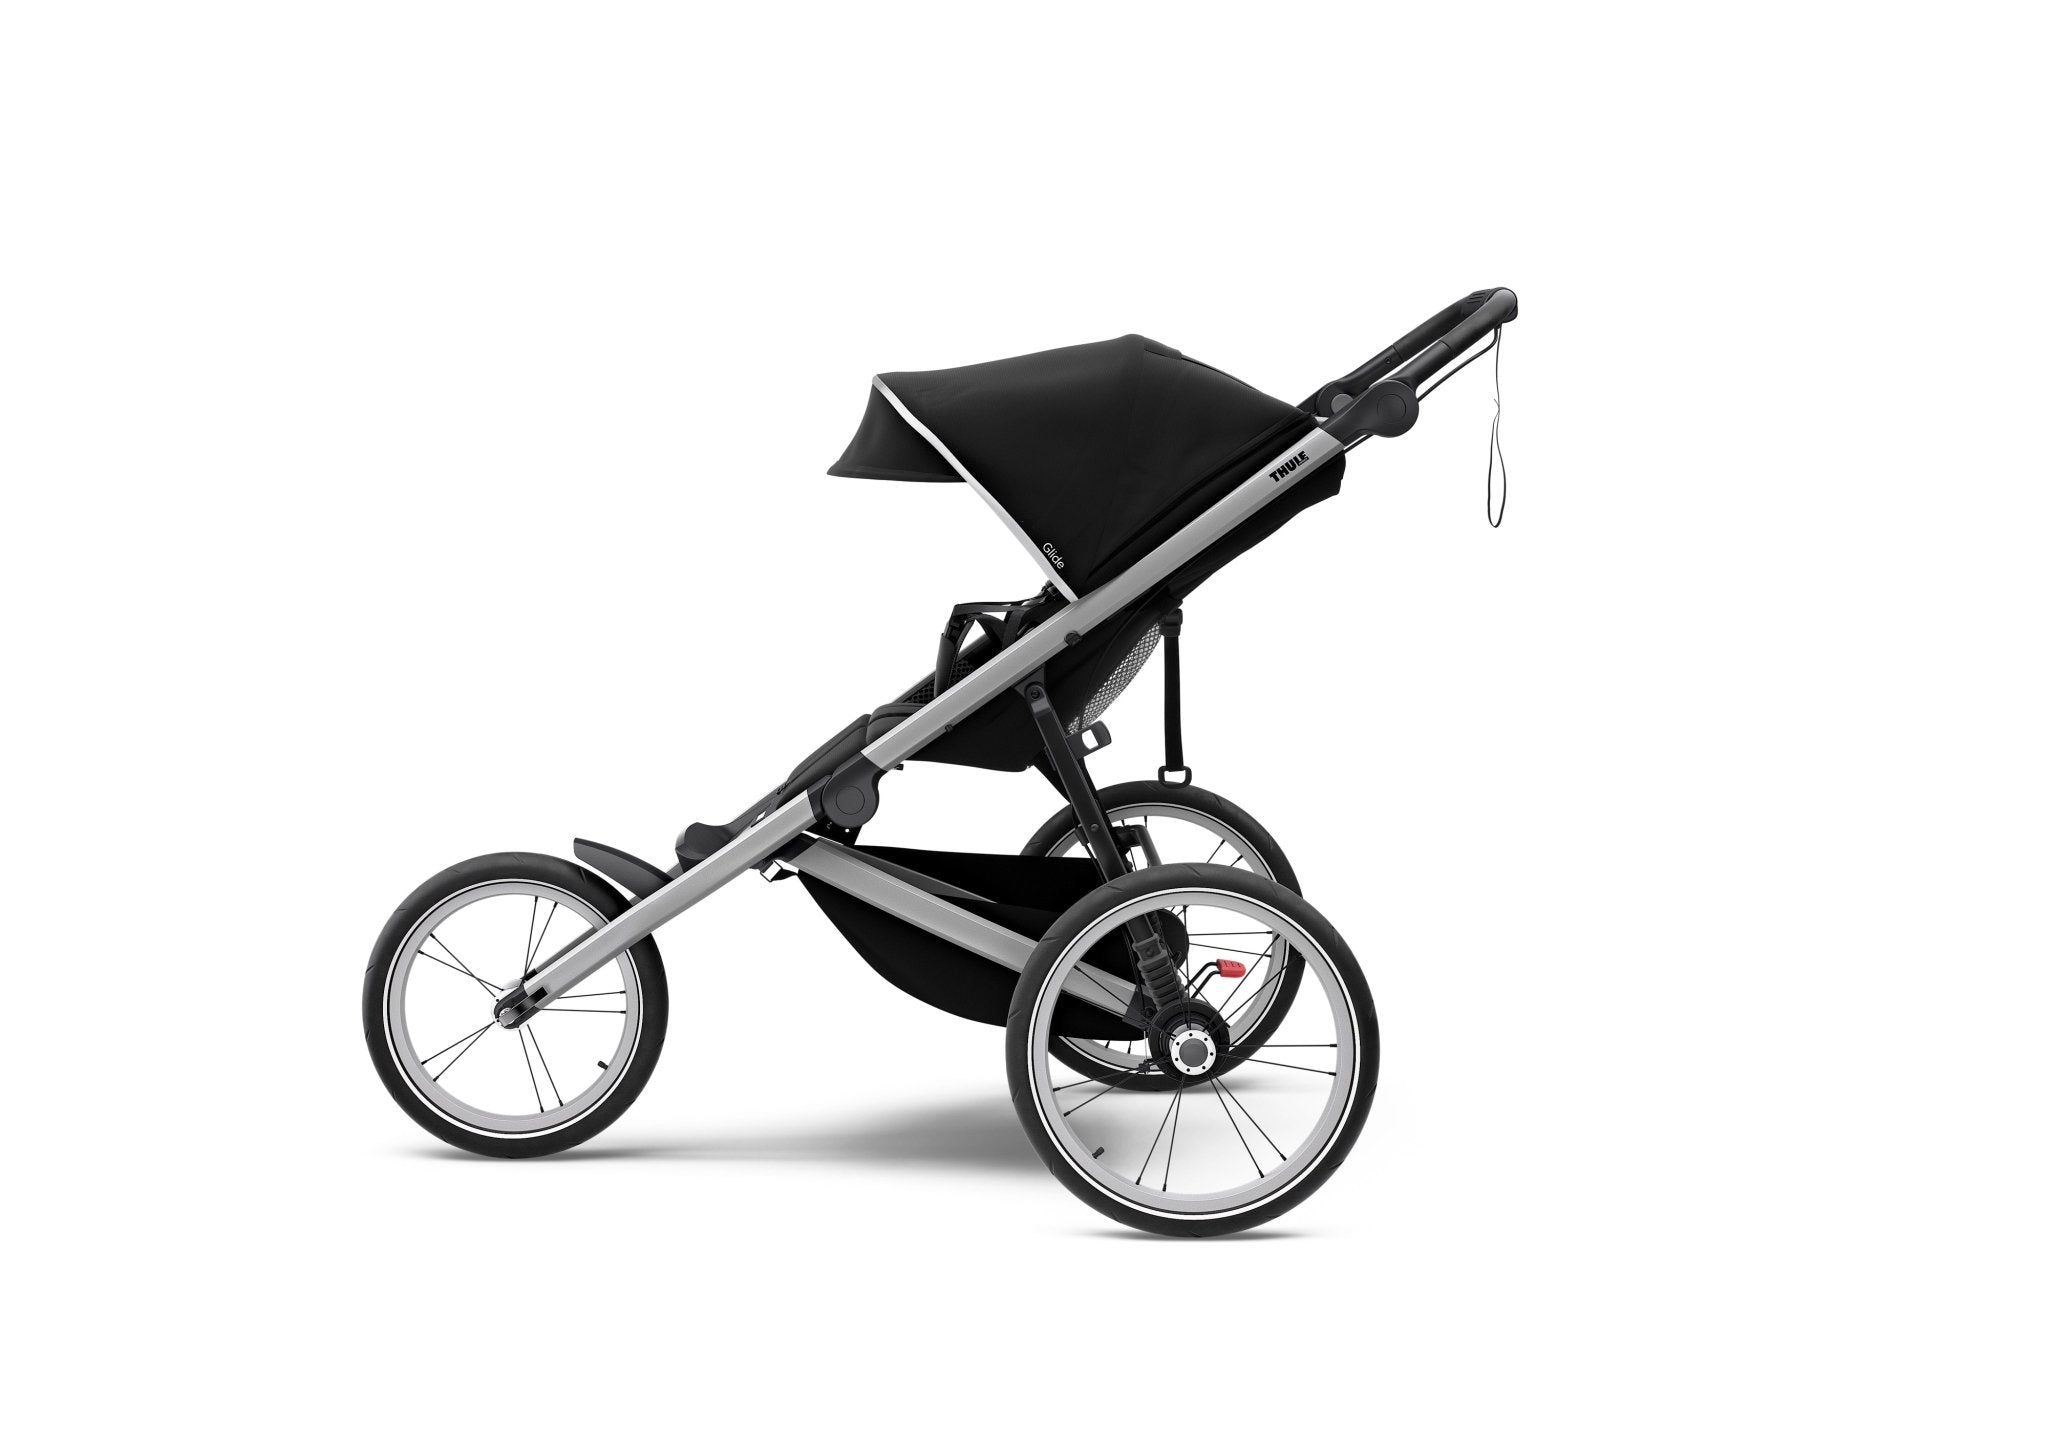 Thule Glide 2 Stroller, with Black / Silver Frame - ANB Baby -$500 - $1000